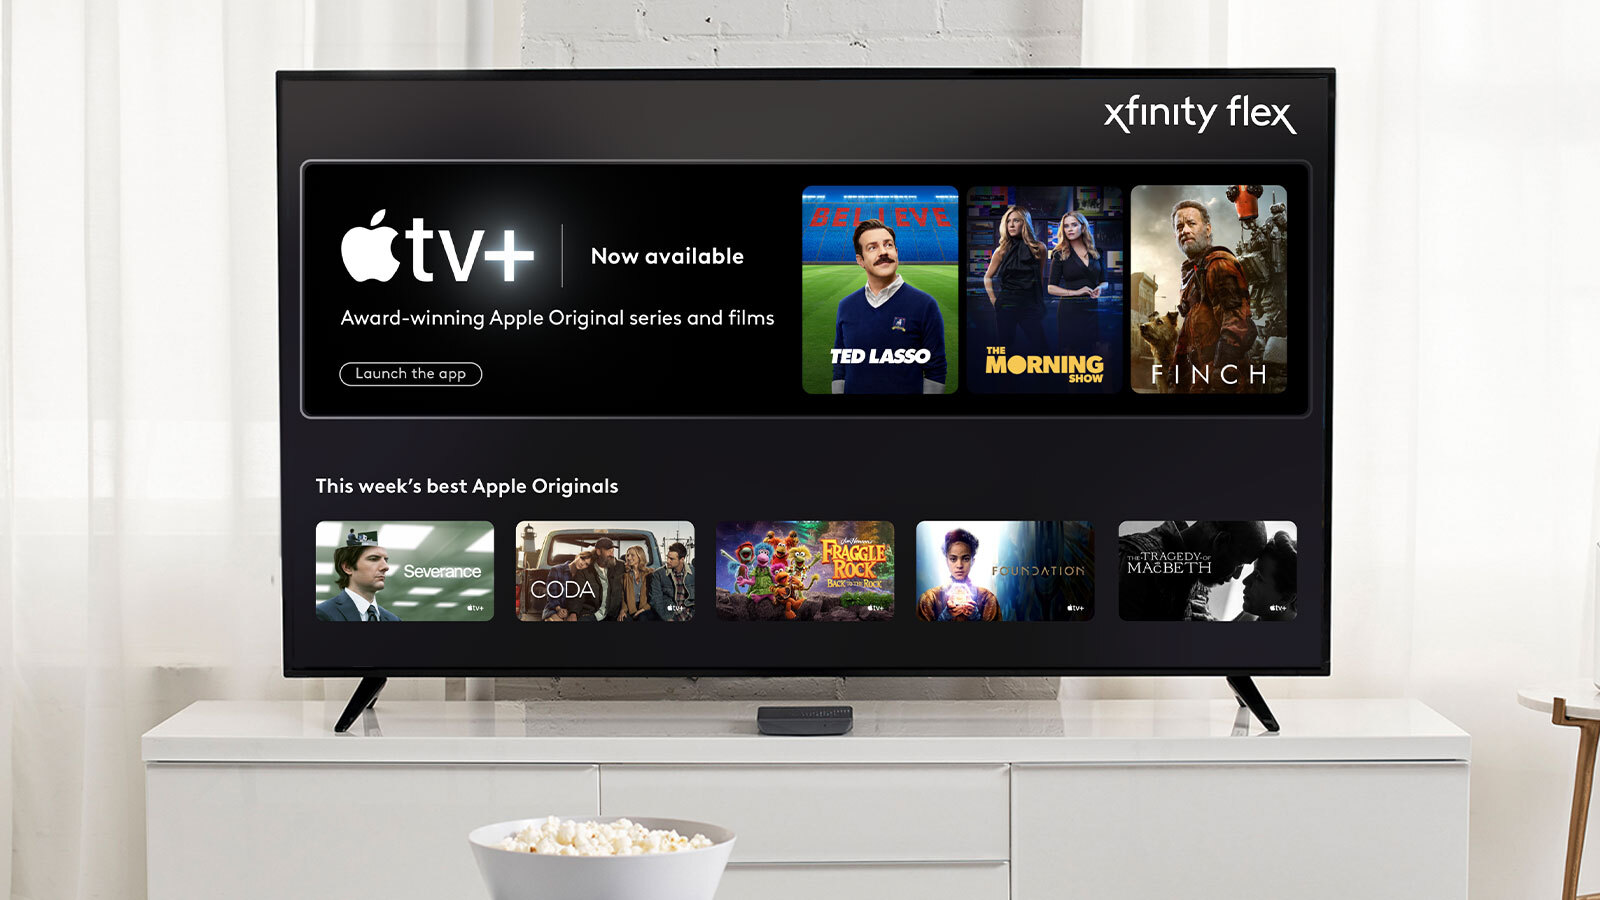 Apple may release a cheaper Apple TV later this year - analyst